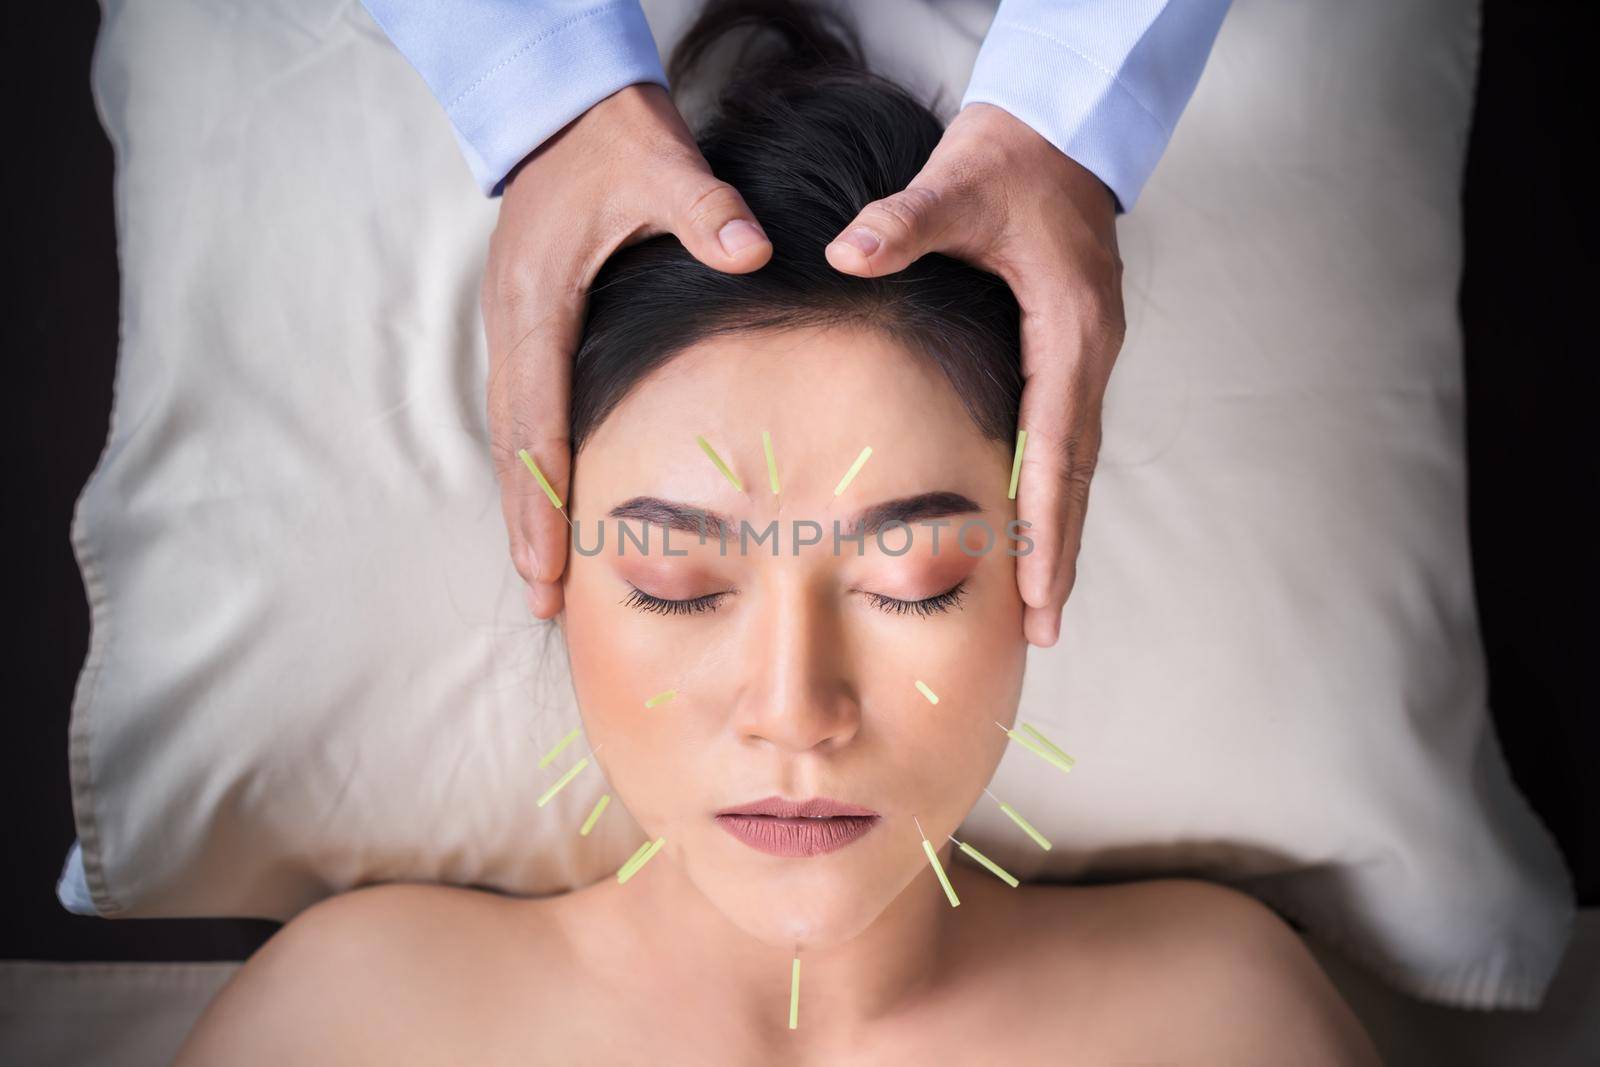 woman undergoing acupuncture treatment on face by geargodz